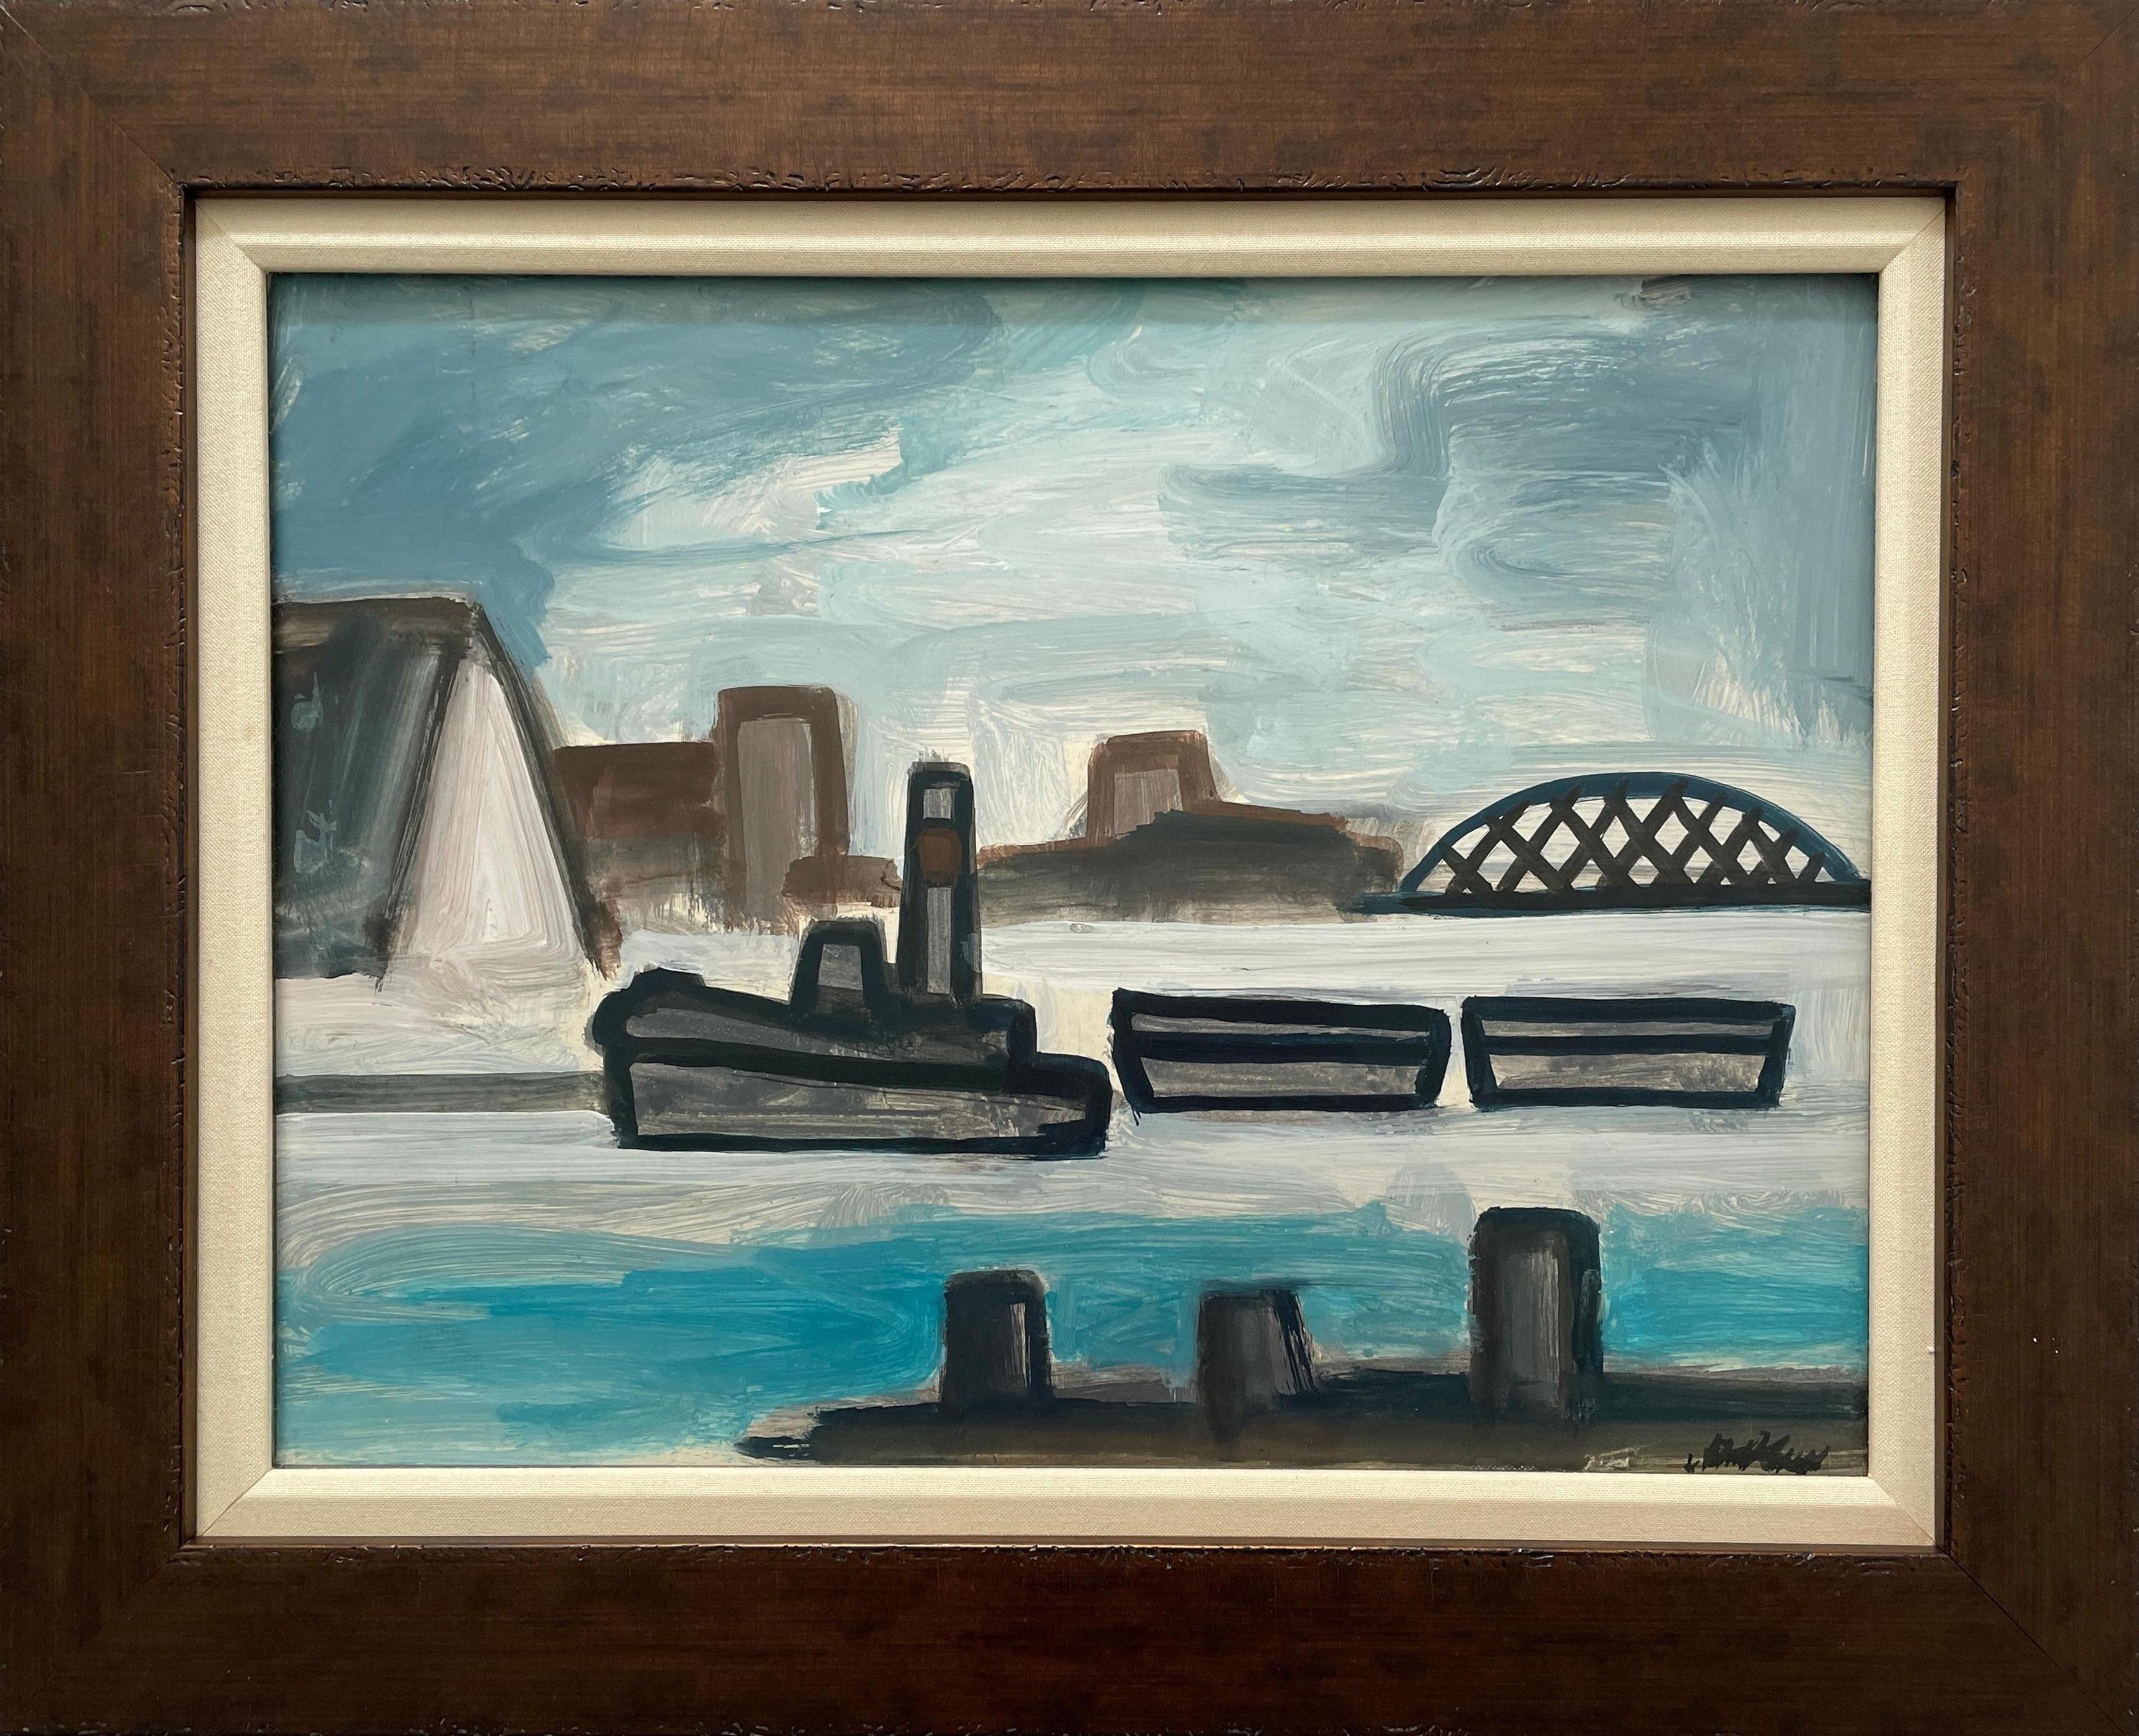 Markey Robinson Landscape Painting - Tugboat on a river with bridge and buildings. Title - Tugboat on the River